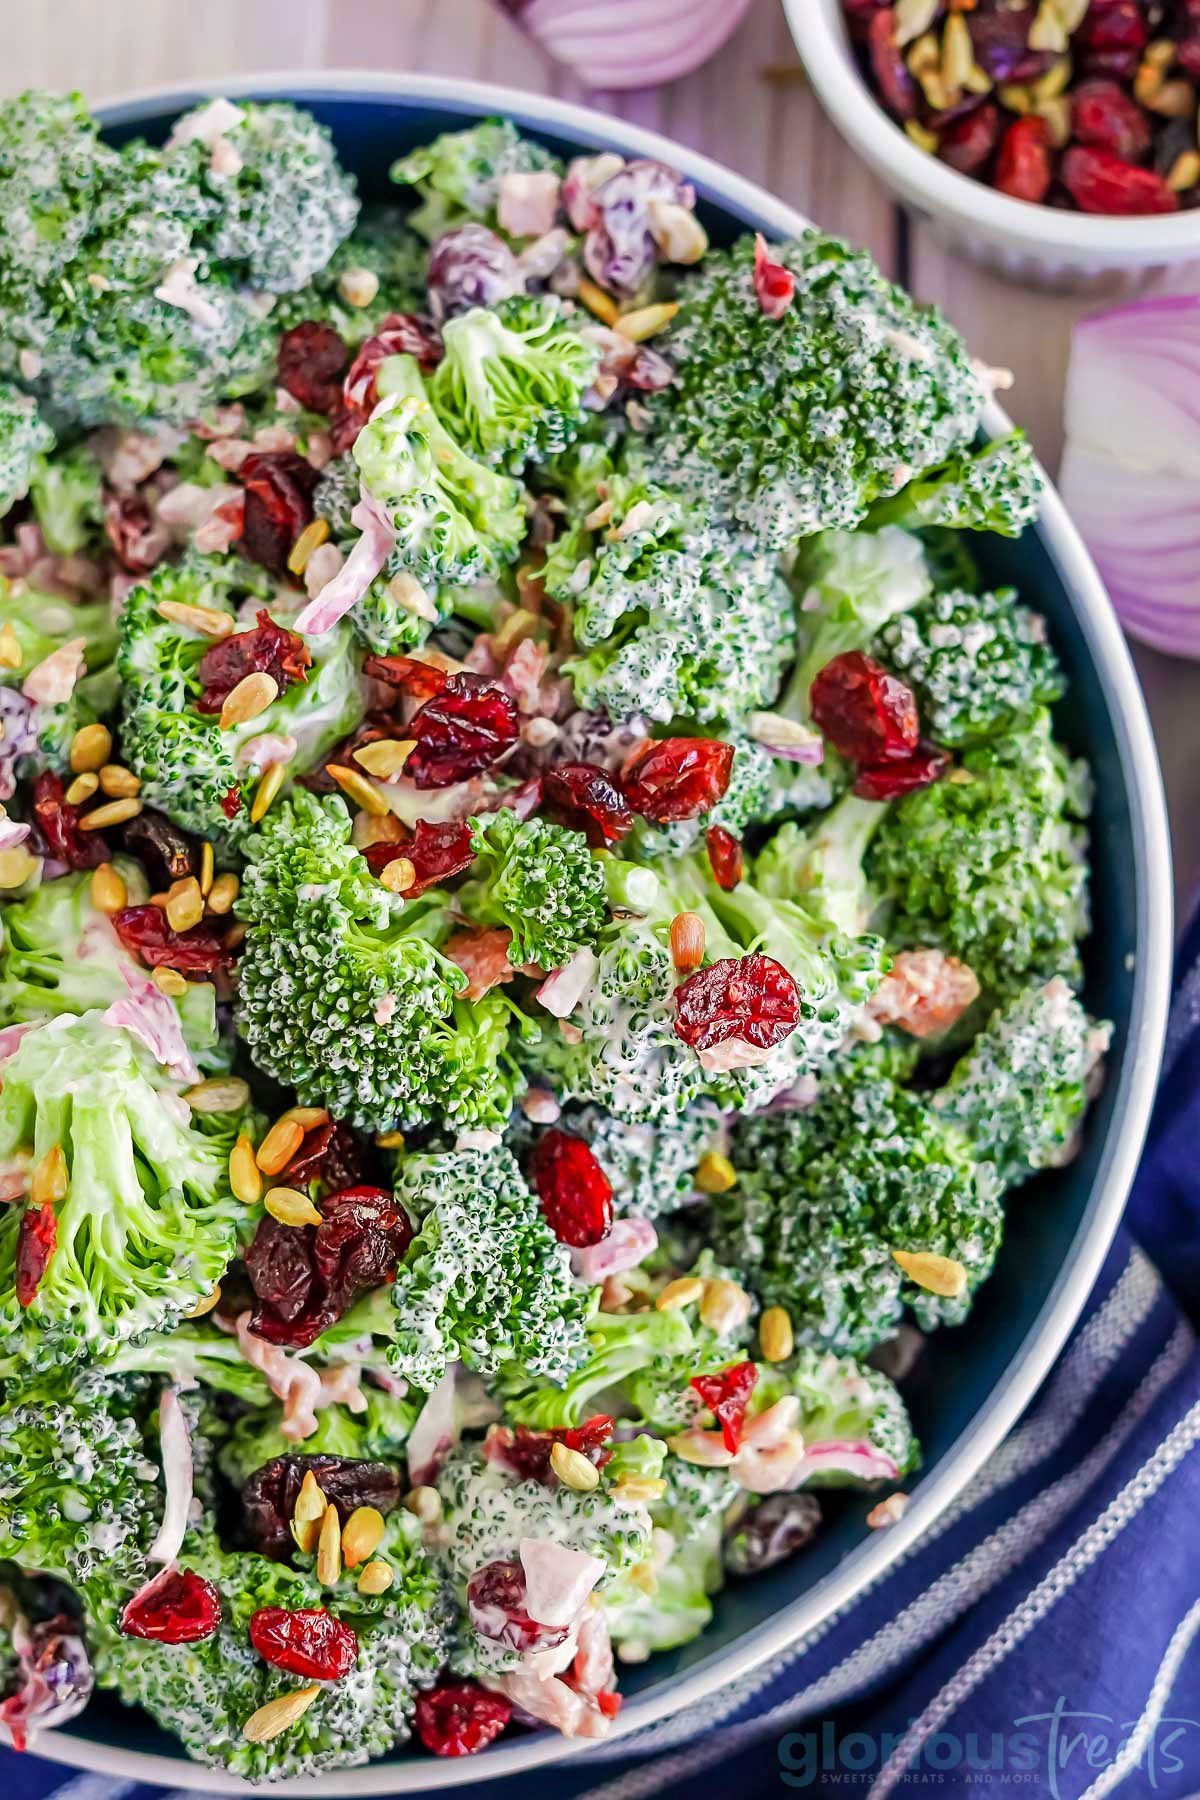 top down look at a broccoli salad made with bacon, cranberries and sunflower seeds in a blue bowl with a blue striped napkin next to it,